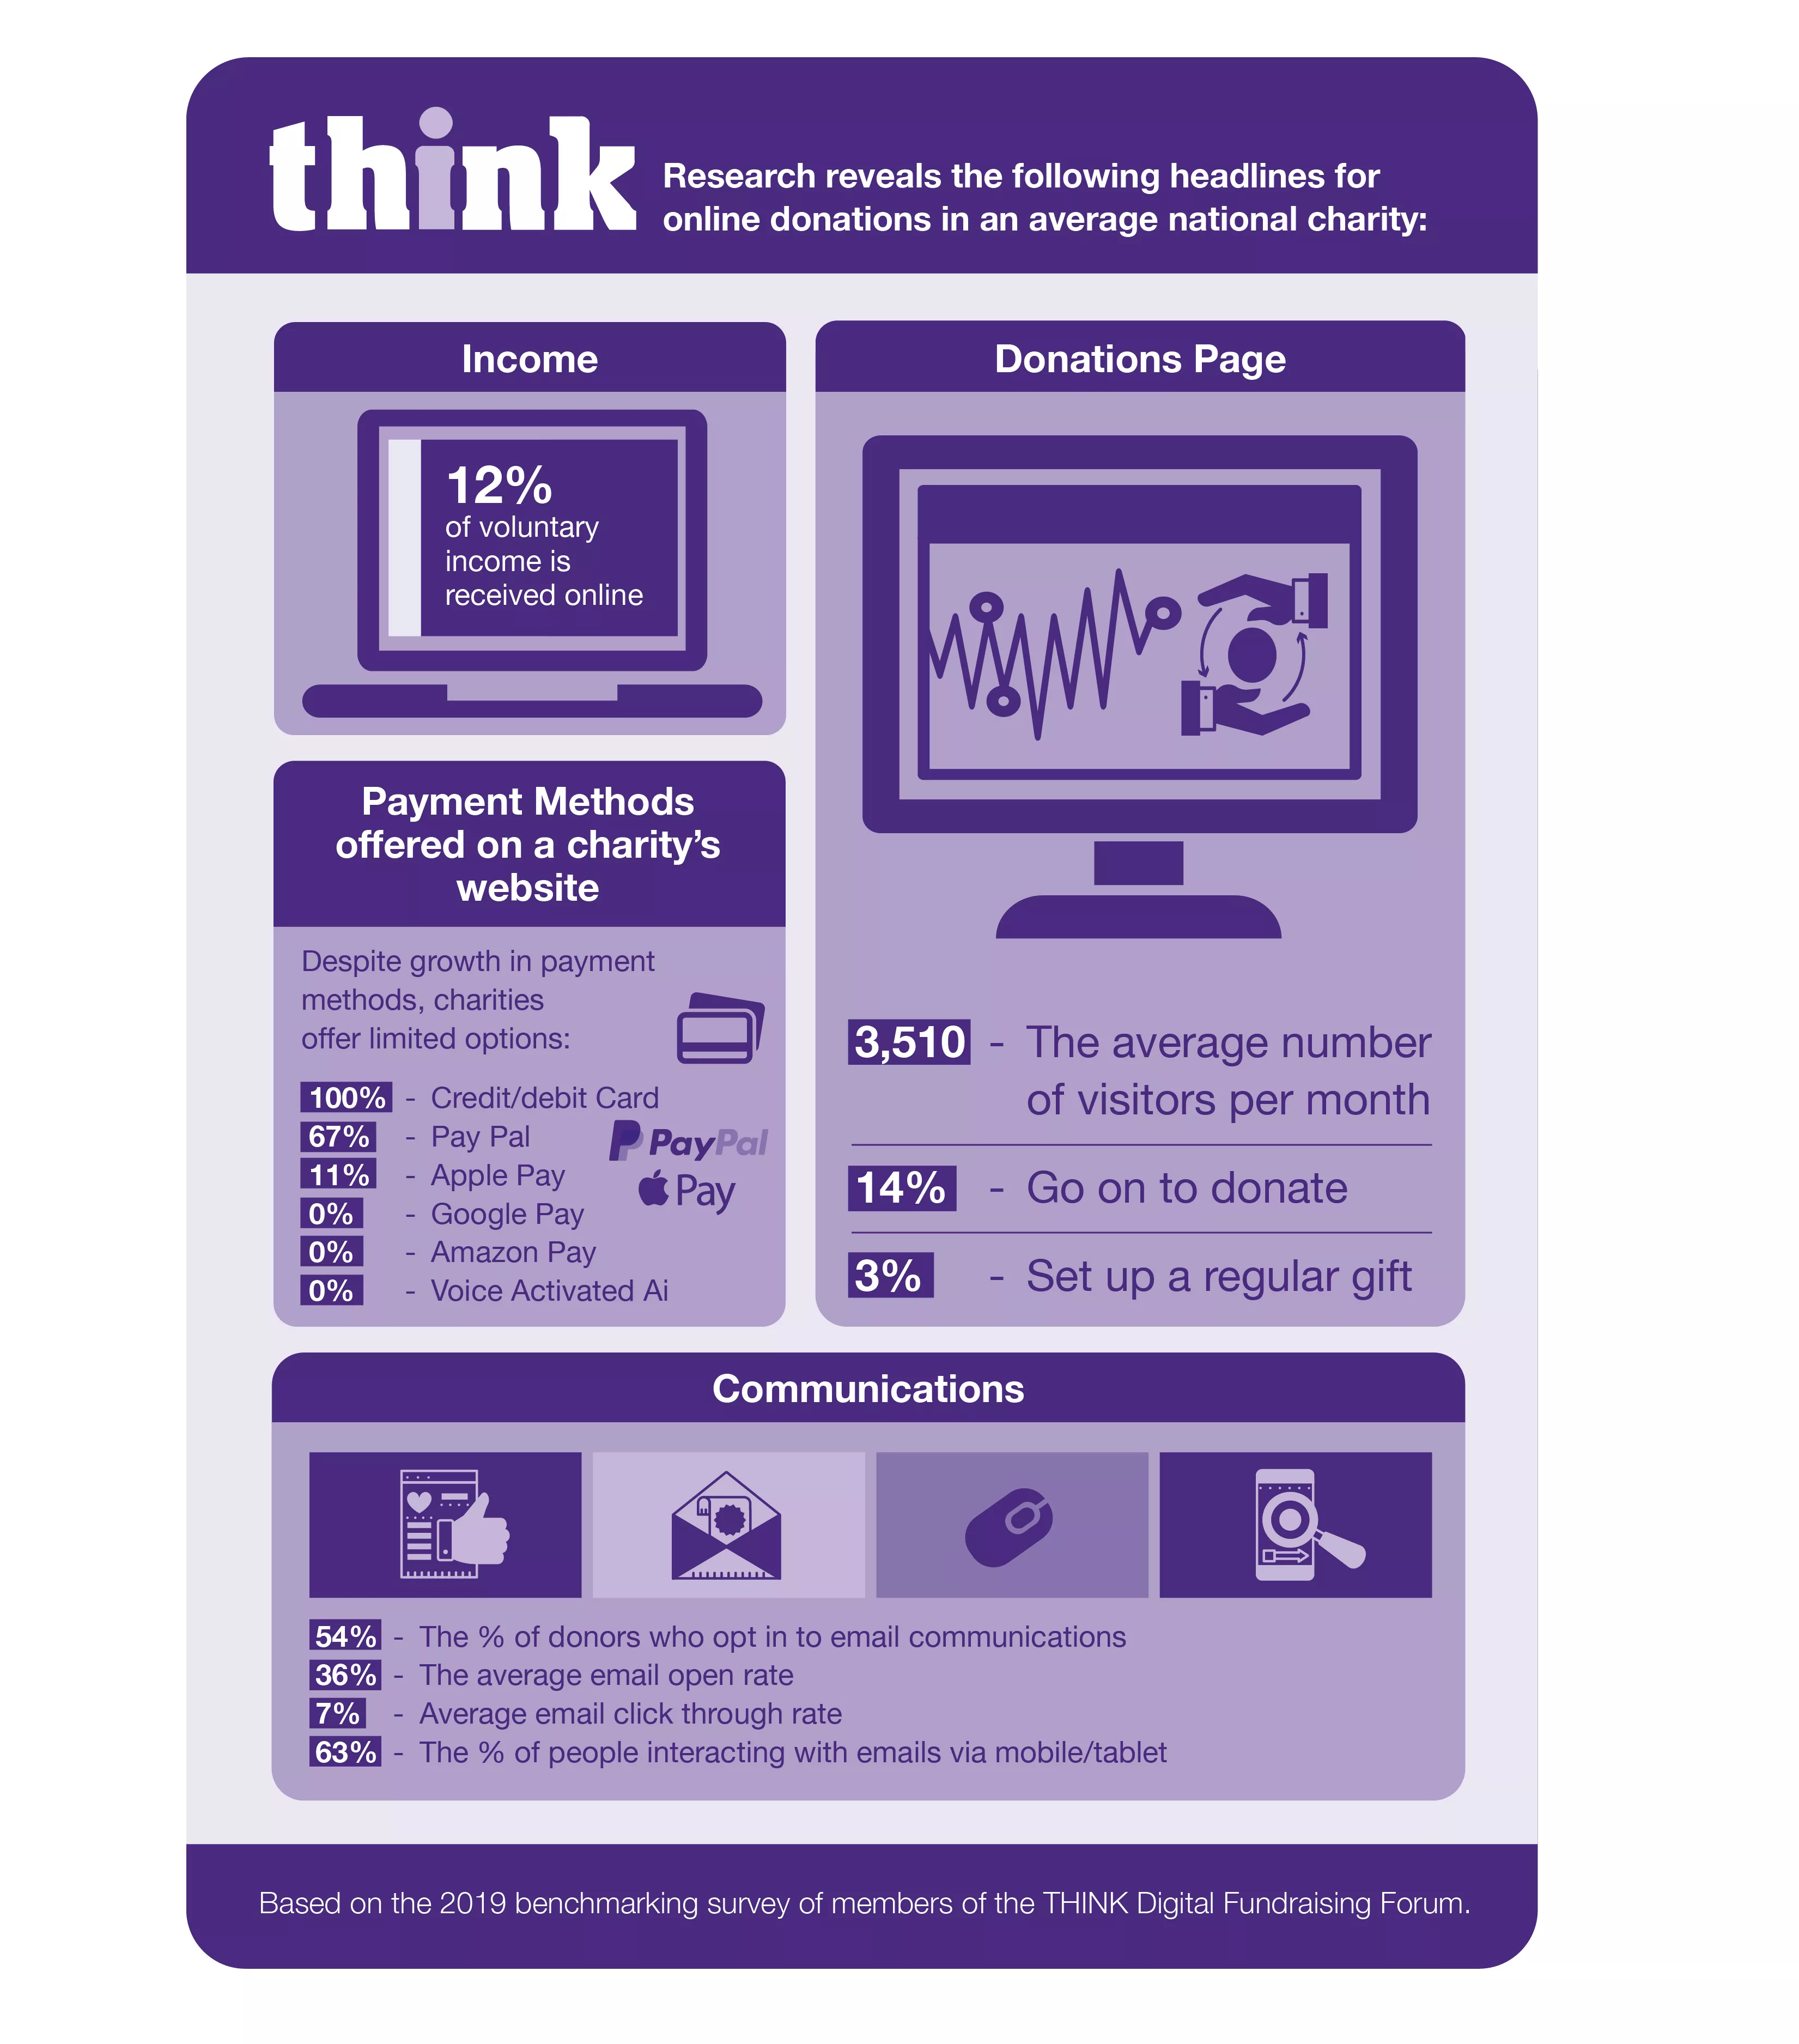 Infographic of THINK Digital Fundraising Forum benchmark 2019